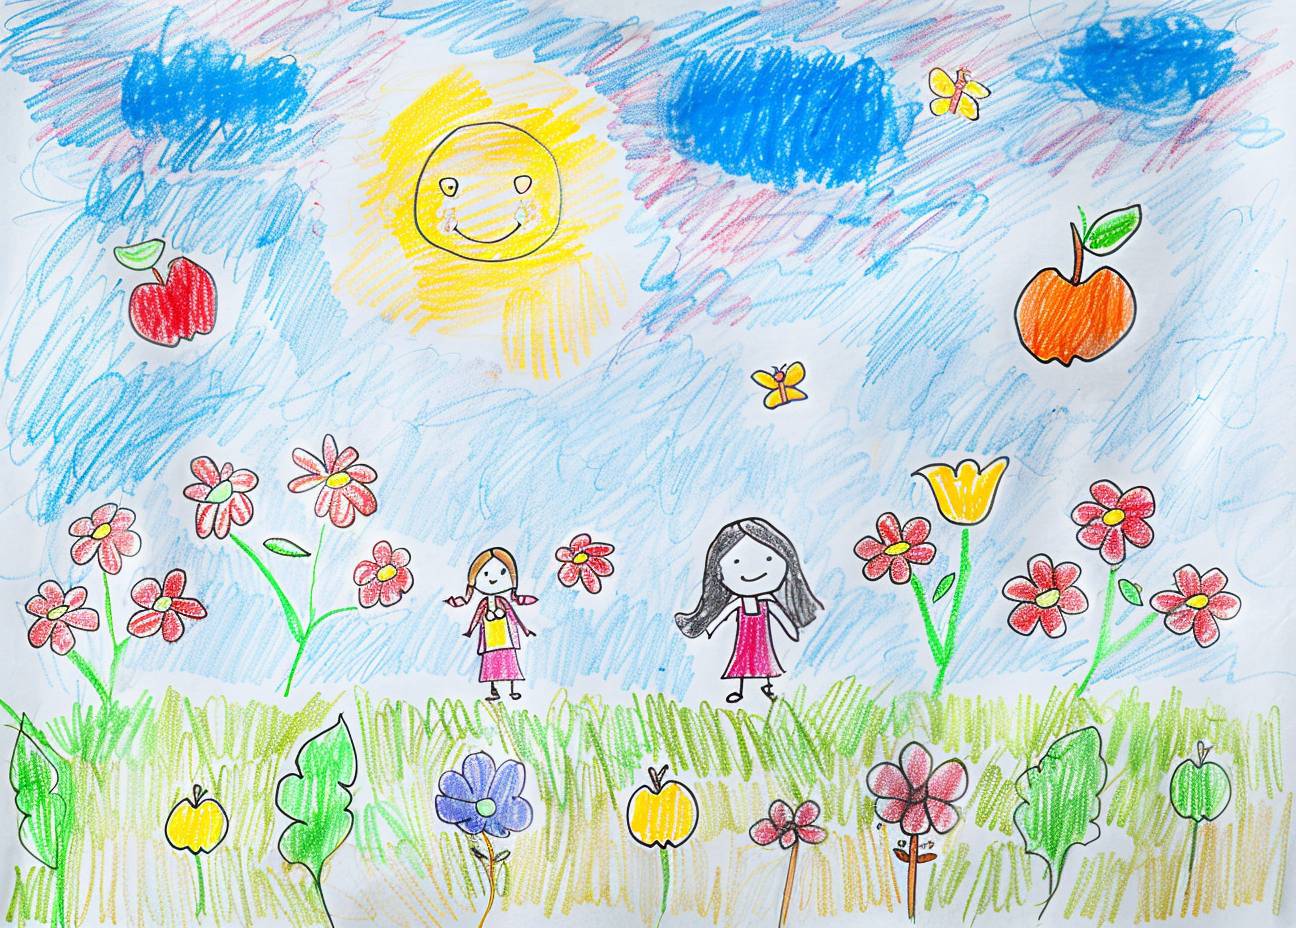 Naive children's drawing with colored chalk on white paper, made by hand by a fat child in the style of primitive art, depicts a magical sky with many flowers and butterflies, a magical image for a children's book, with a sky background, flat color background, simple lines, no shading, and cartoonish cuteness, with an apple tree behind them.